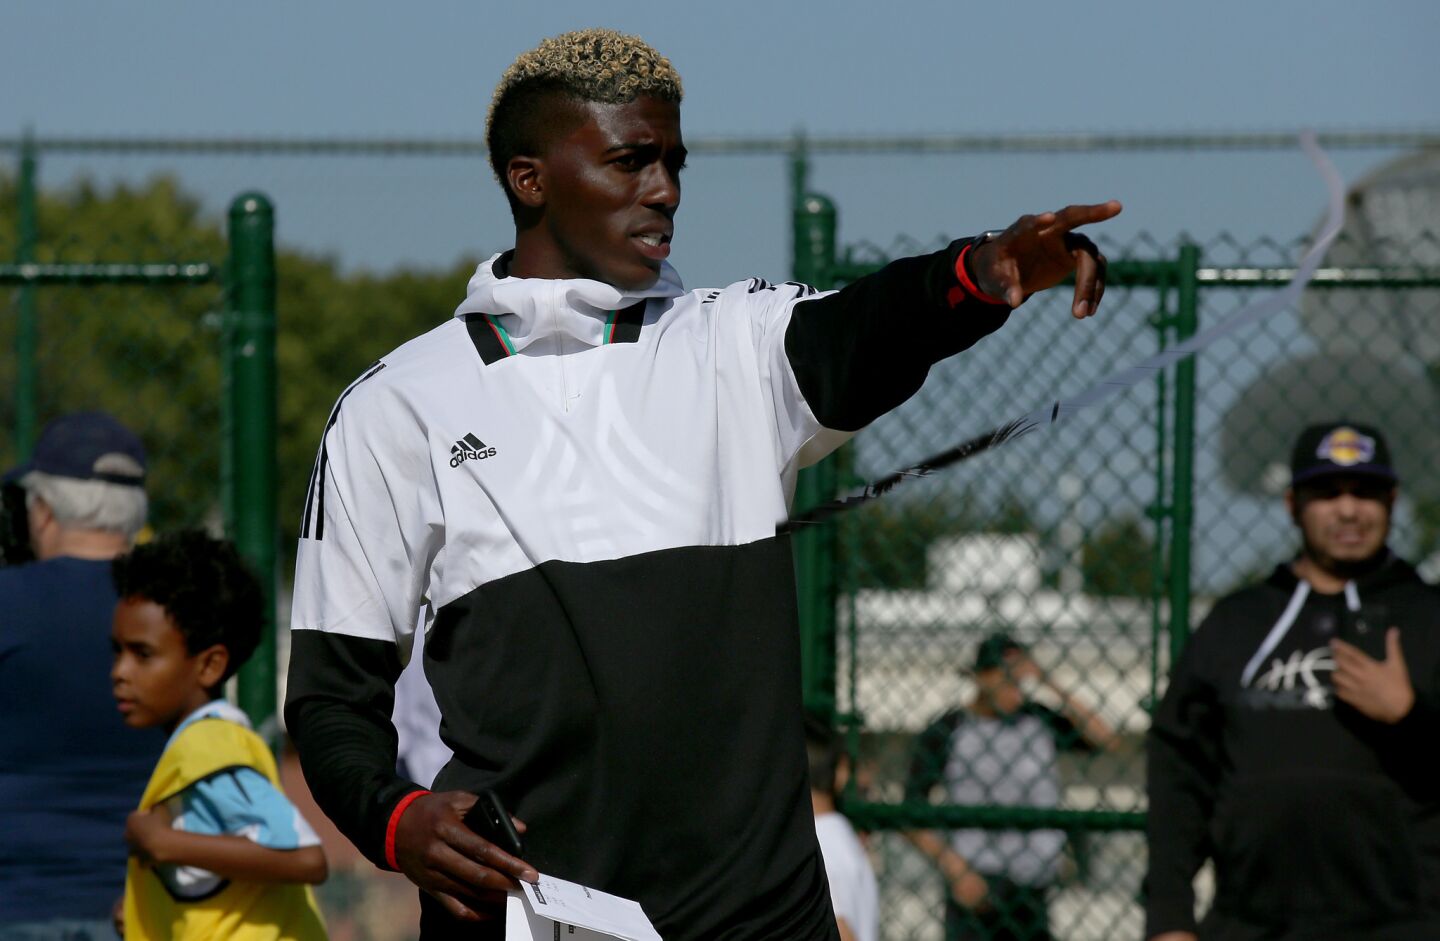 Gyasi Zardes teaches youths in his hometown of Hawthorne about futsal, a mini version of soccer.